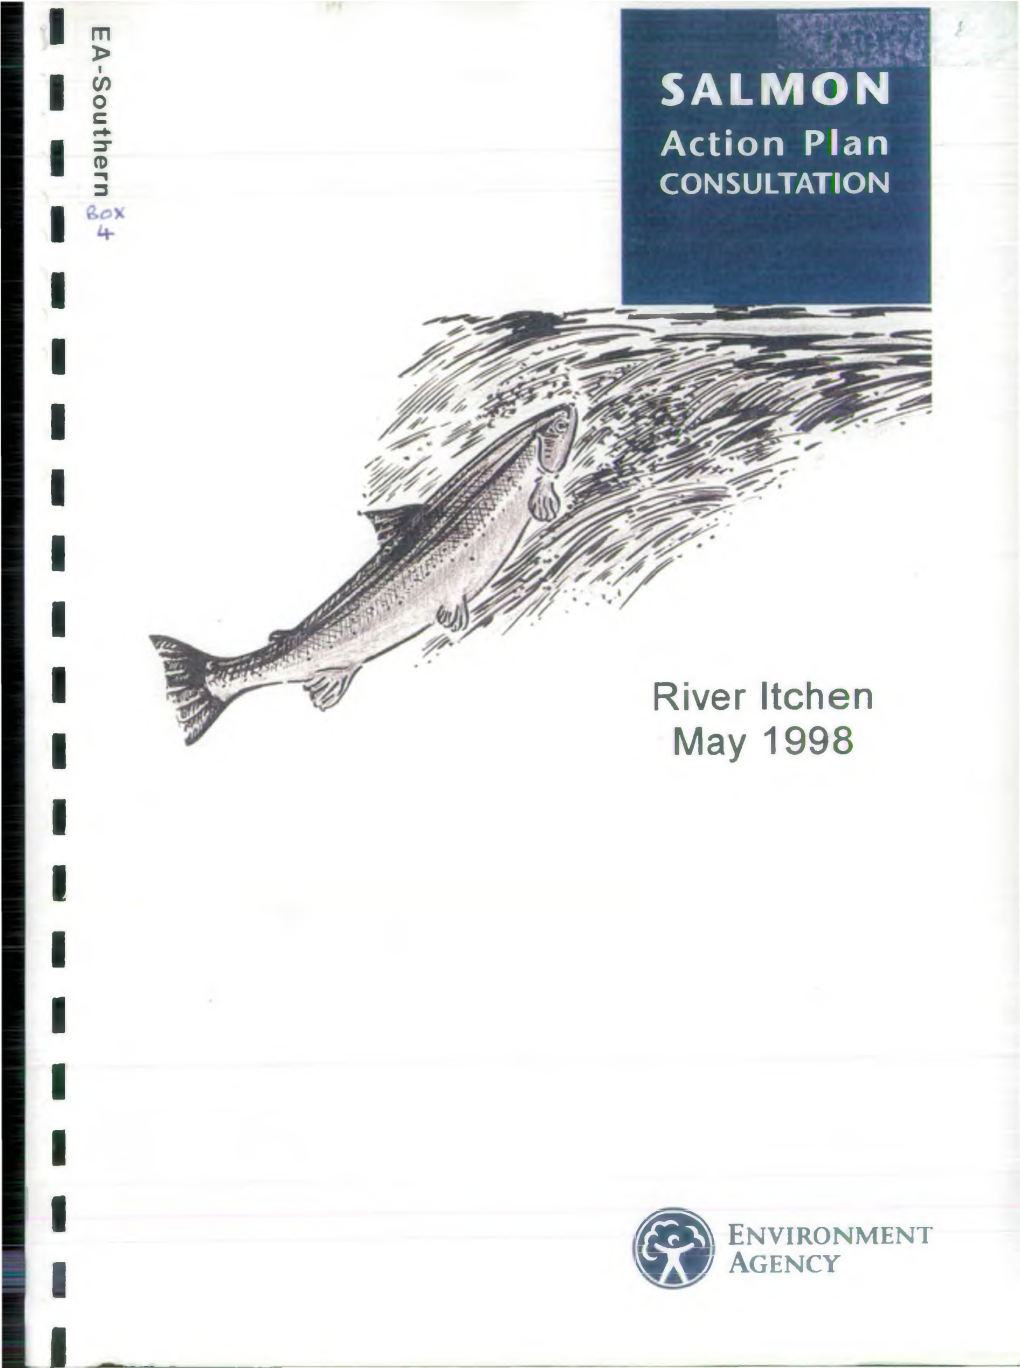 SALMON Action Action Plan CONSULTATION River Itchen Tfssfcy E N V Ir O N M E N T W Jm